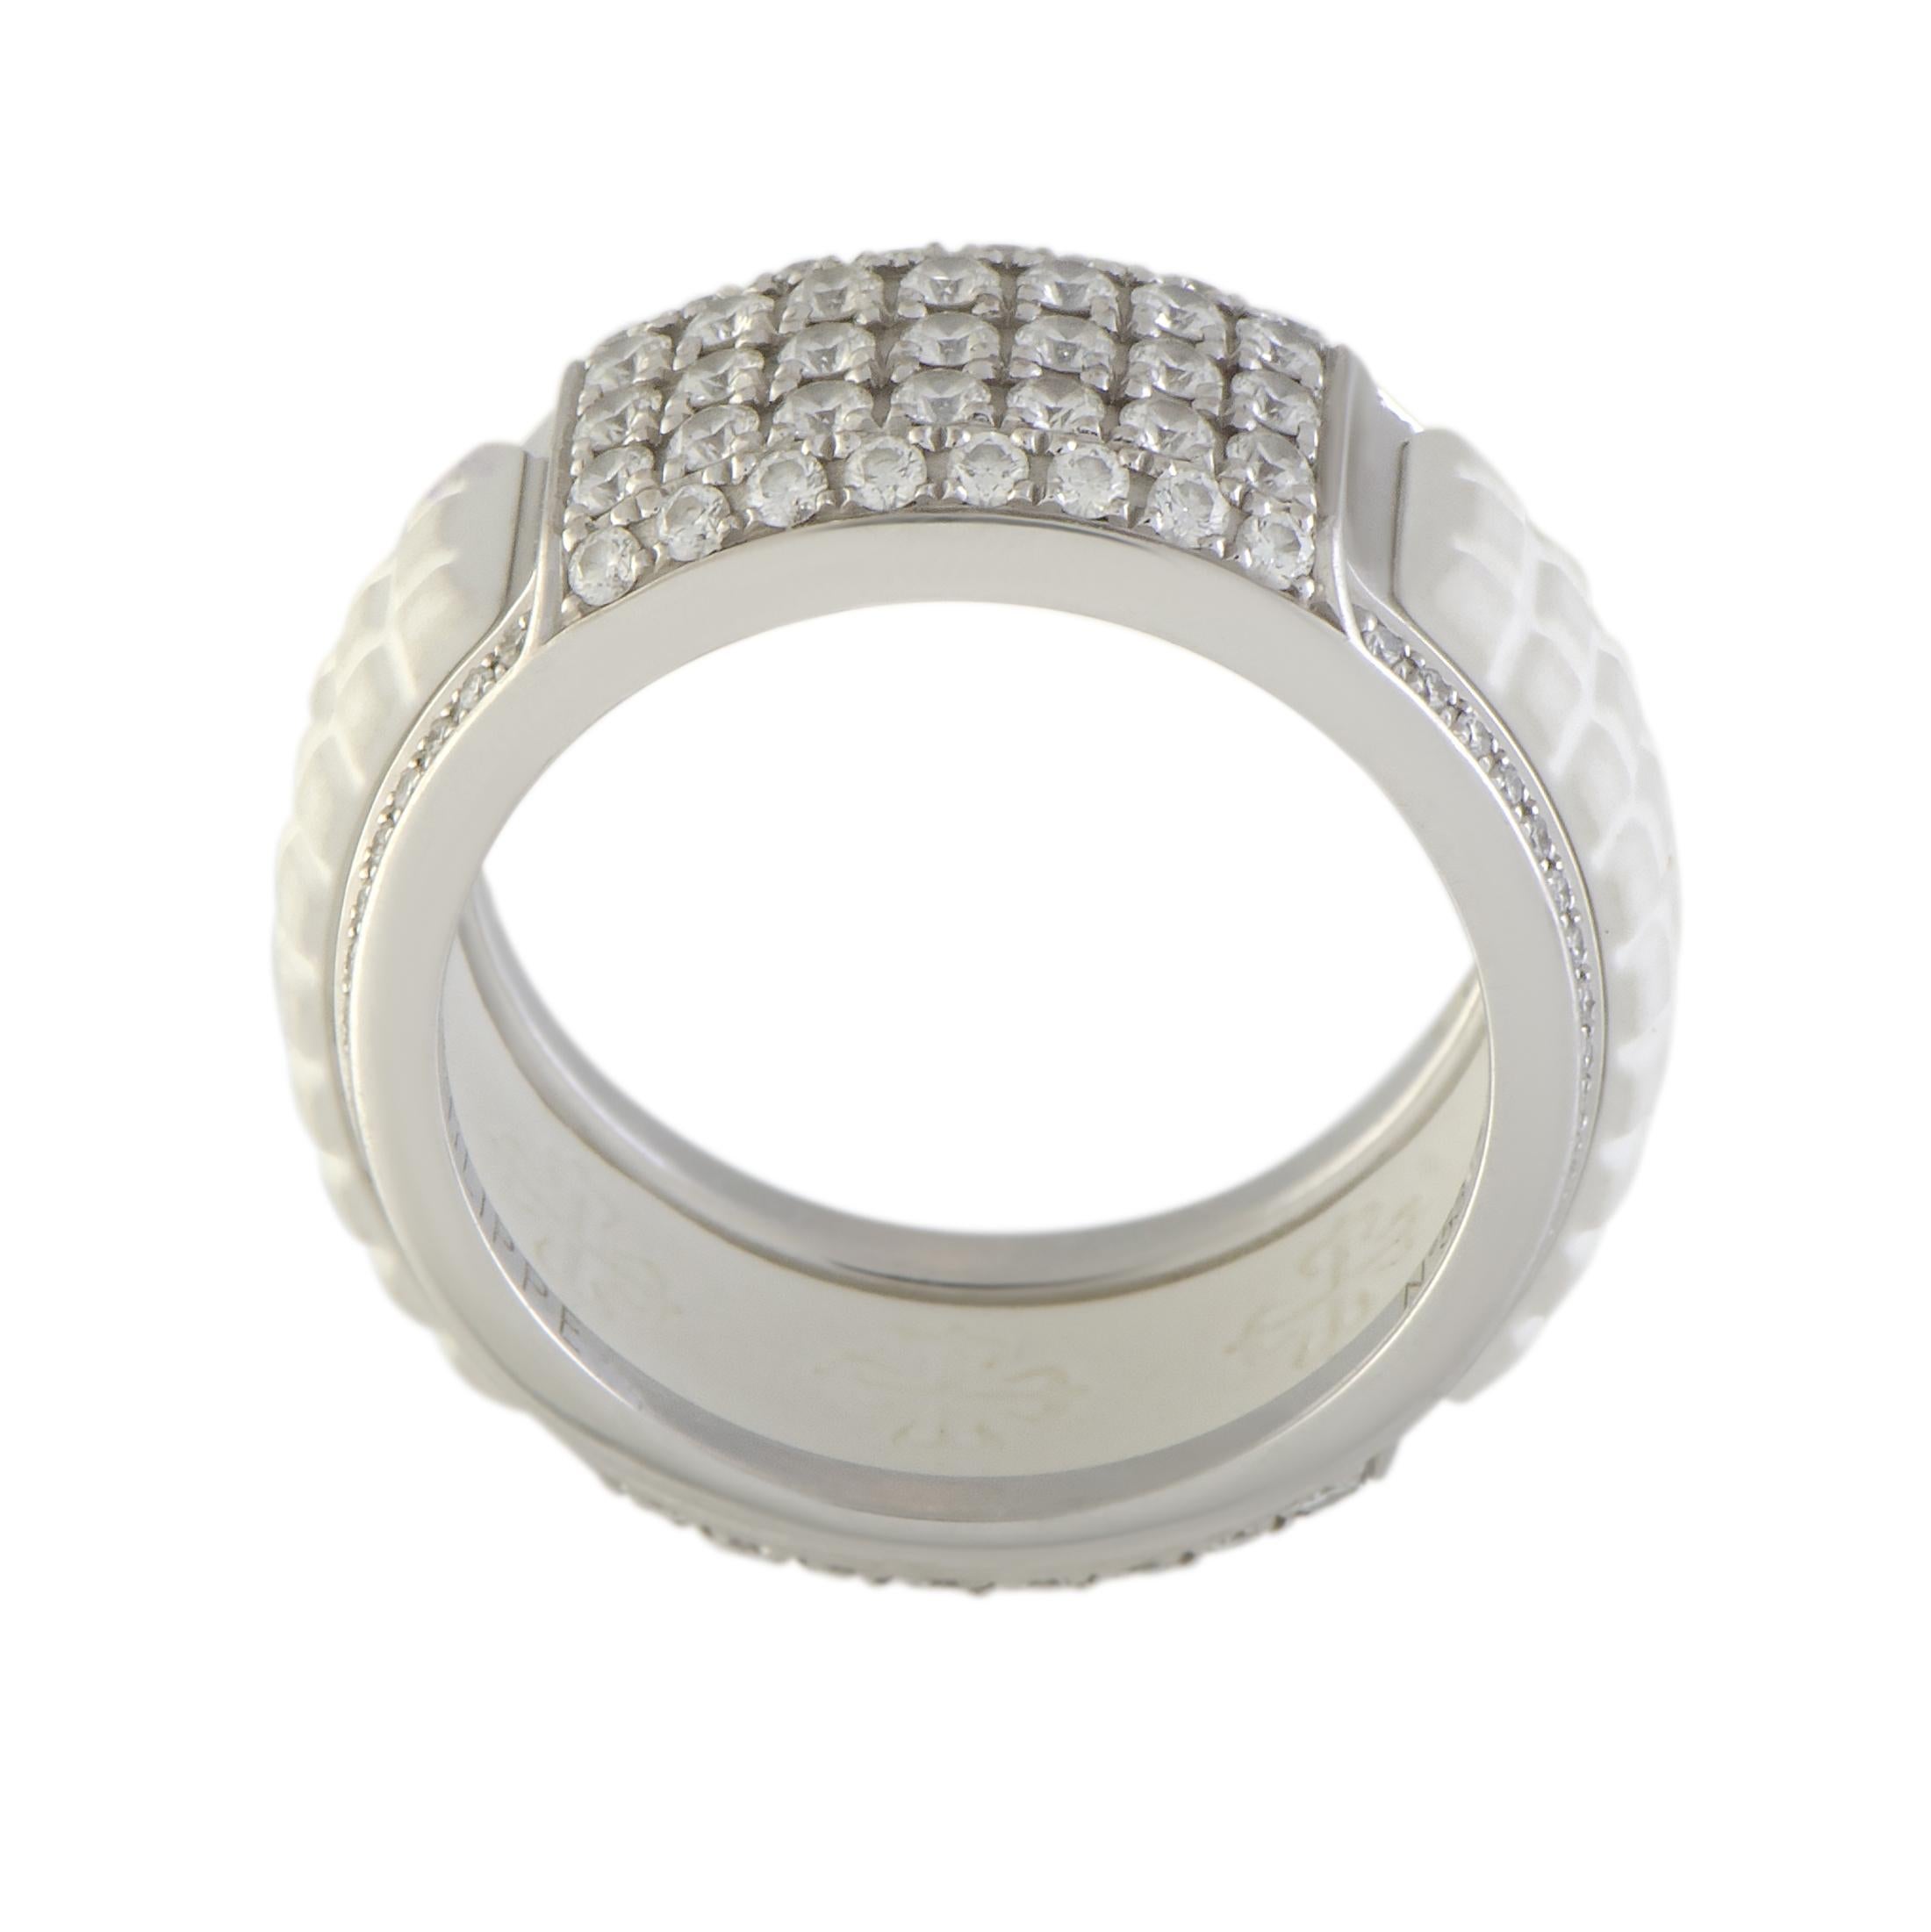 The incredibly unconventional combination of white rubber and 18K white gold is featured in this exceptional ring, creating a stunningly offbeat sight. The ring is a Patek Philippe design and it is lavishly decorated with a plethora of resplendent